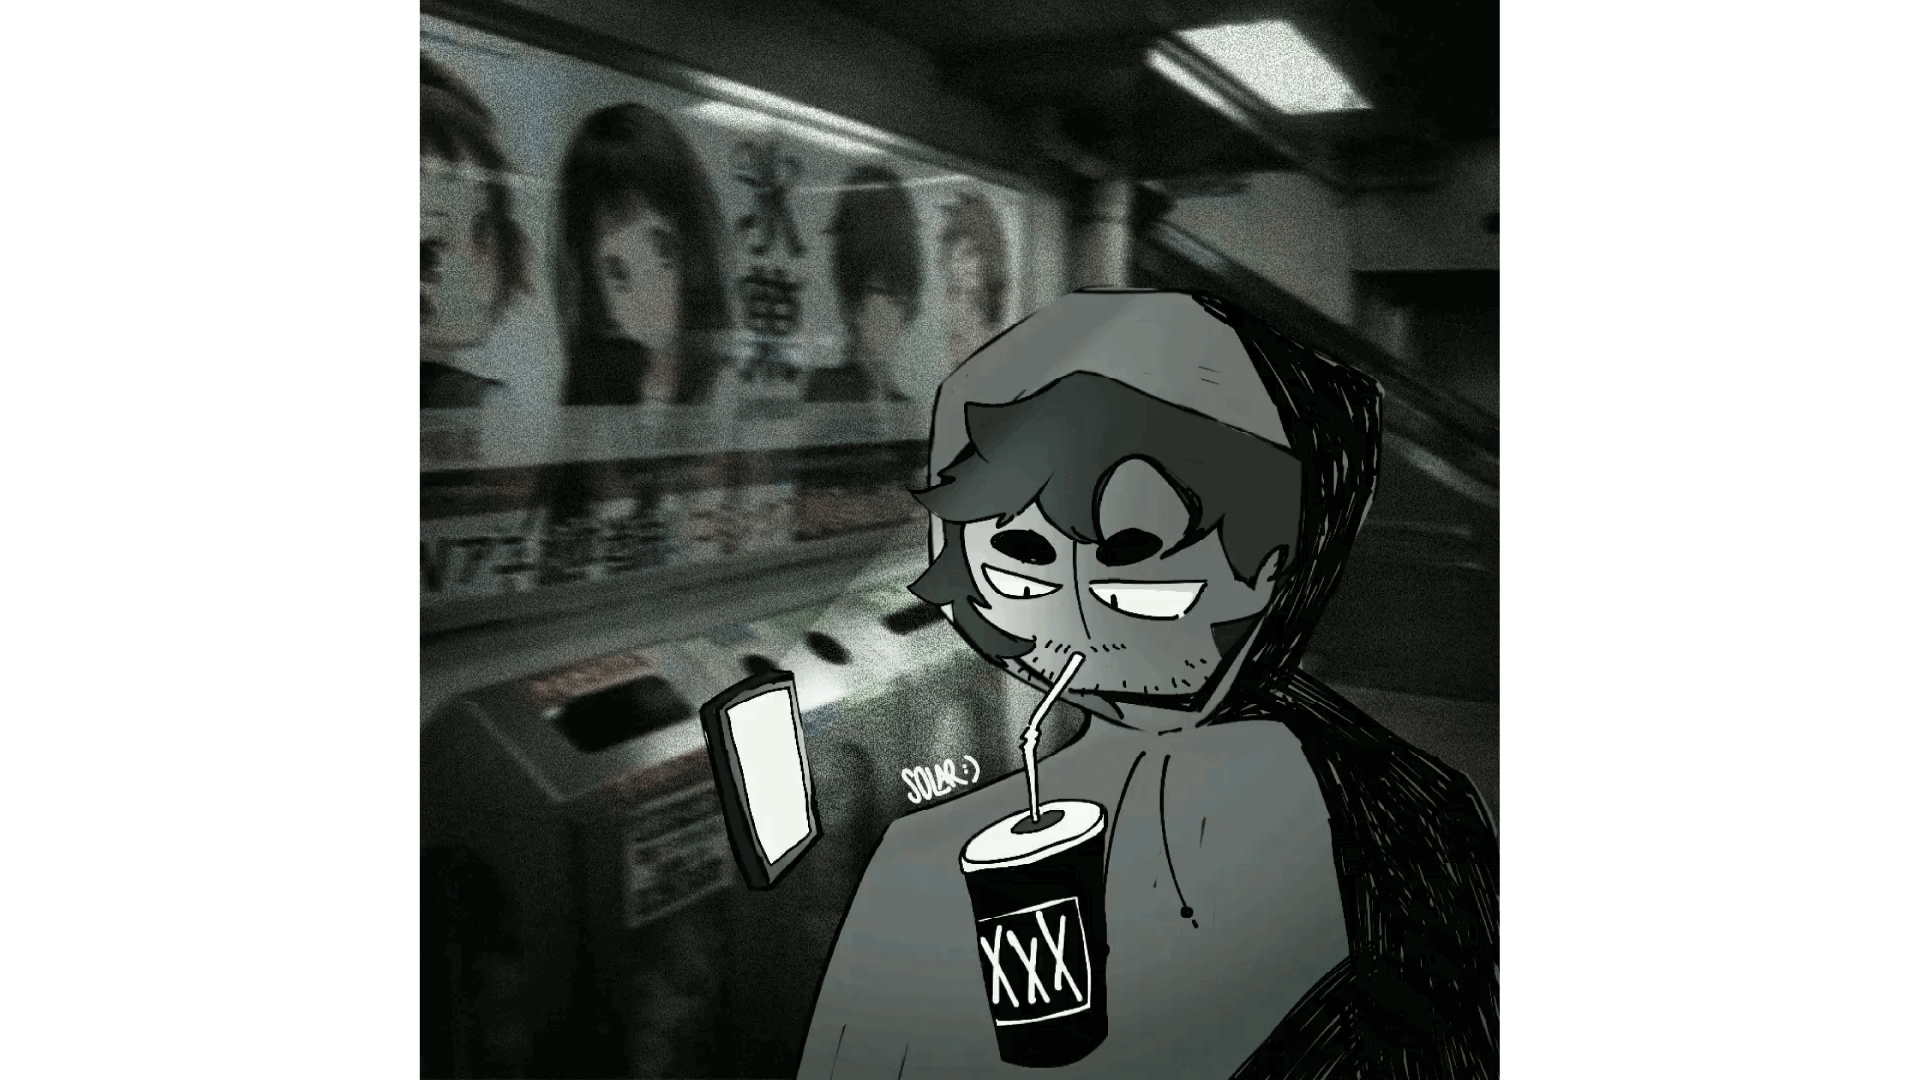 Train Stop, Digital Video / Train Stop, Digital Video, 1080x1080 px, 2022. Animated Gif of original character